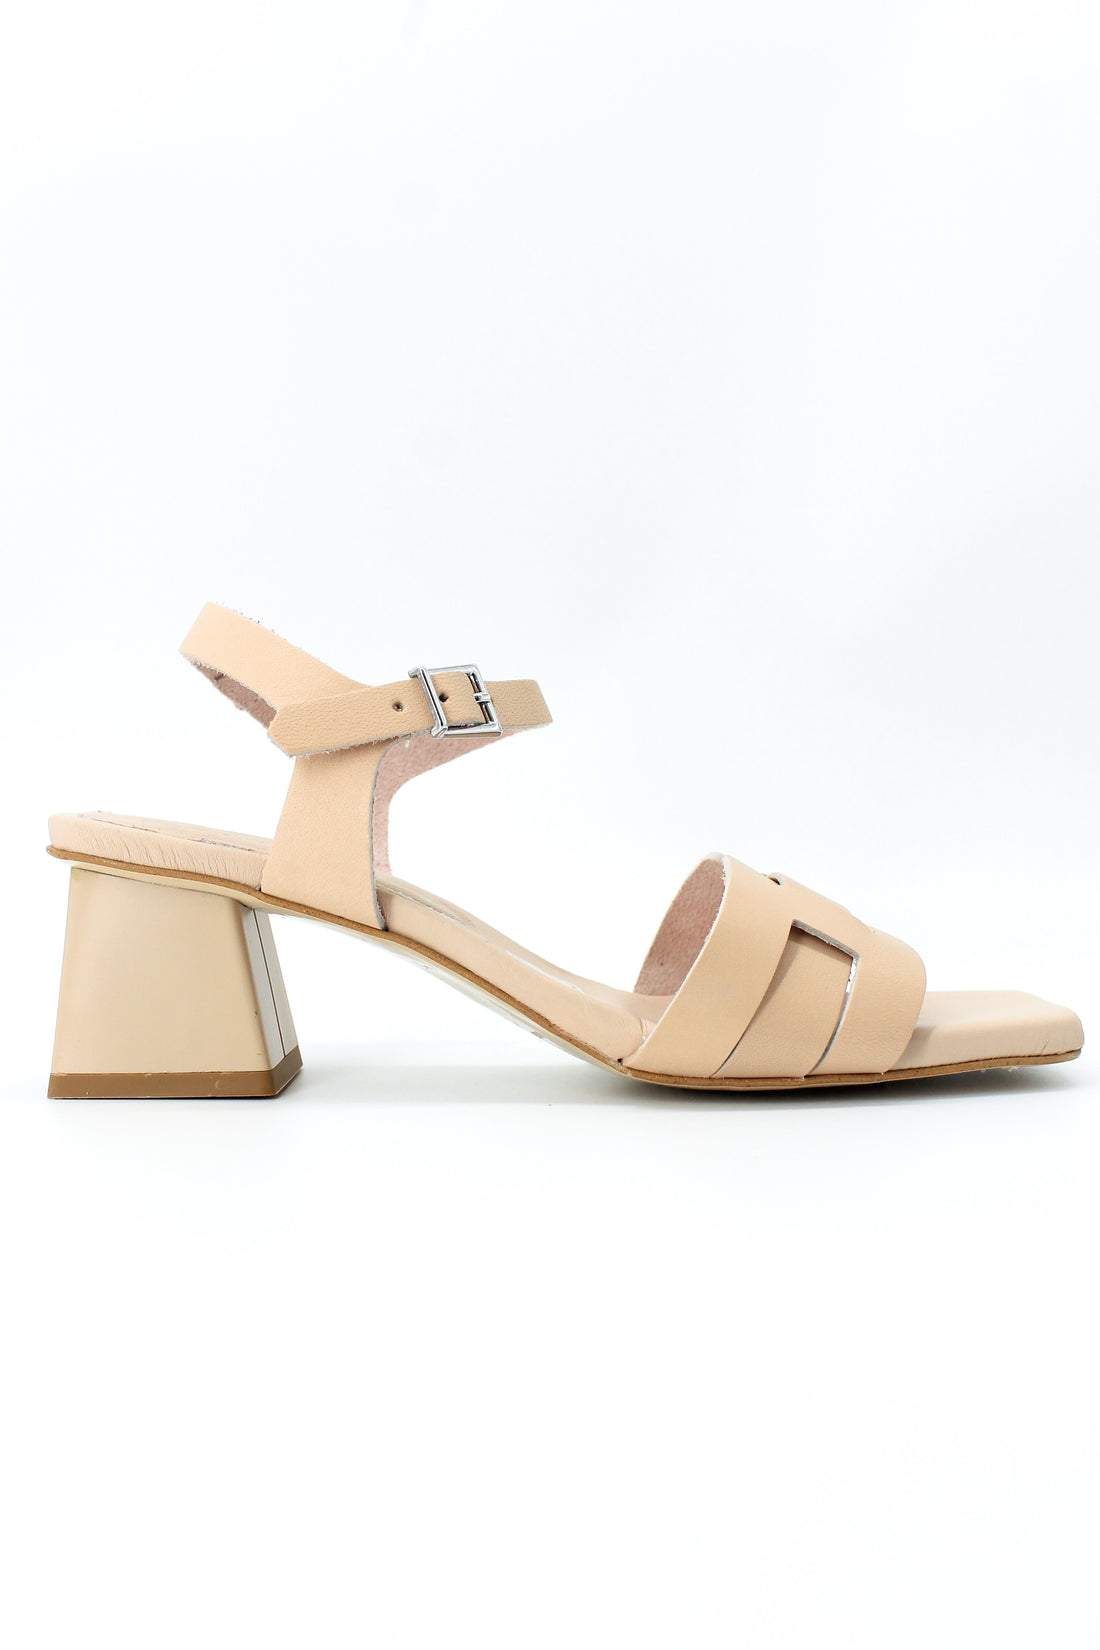 Oh My Sandals 5257 Nude